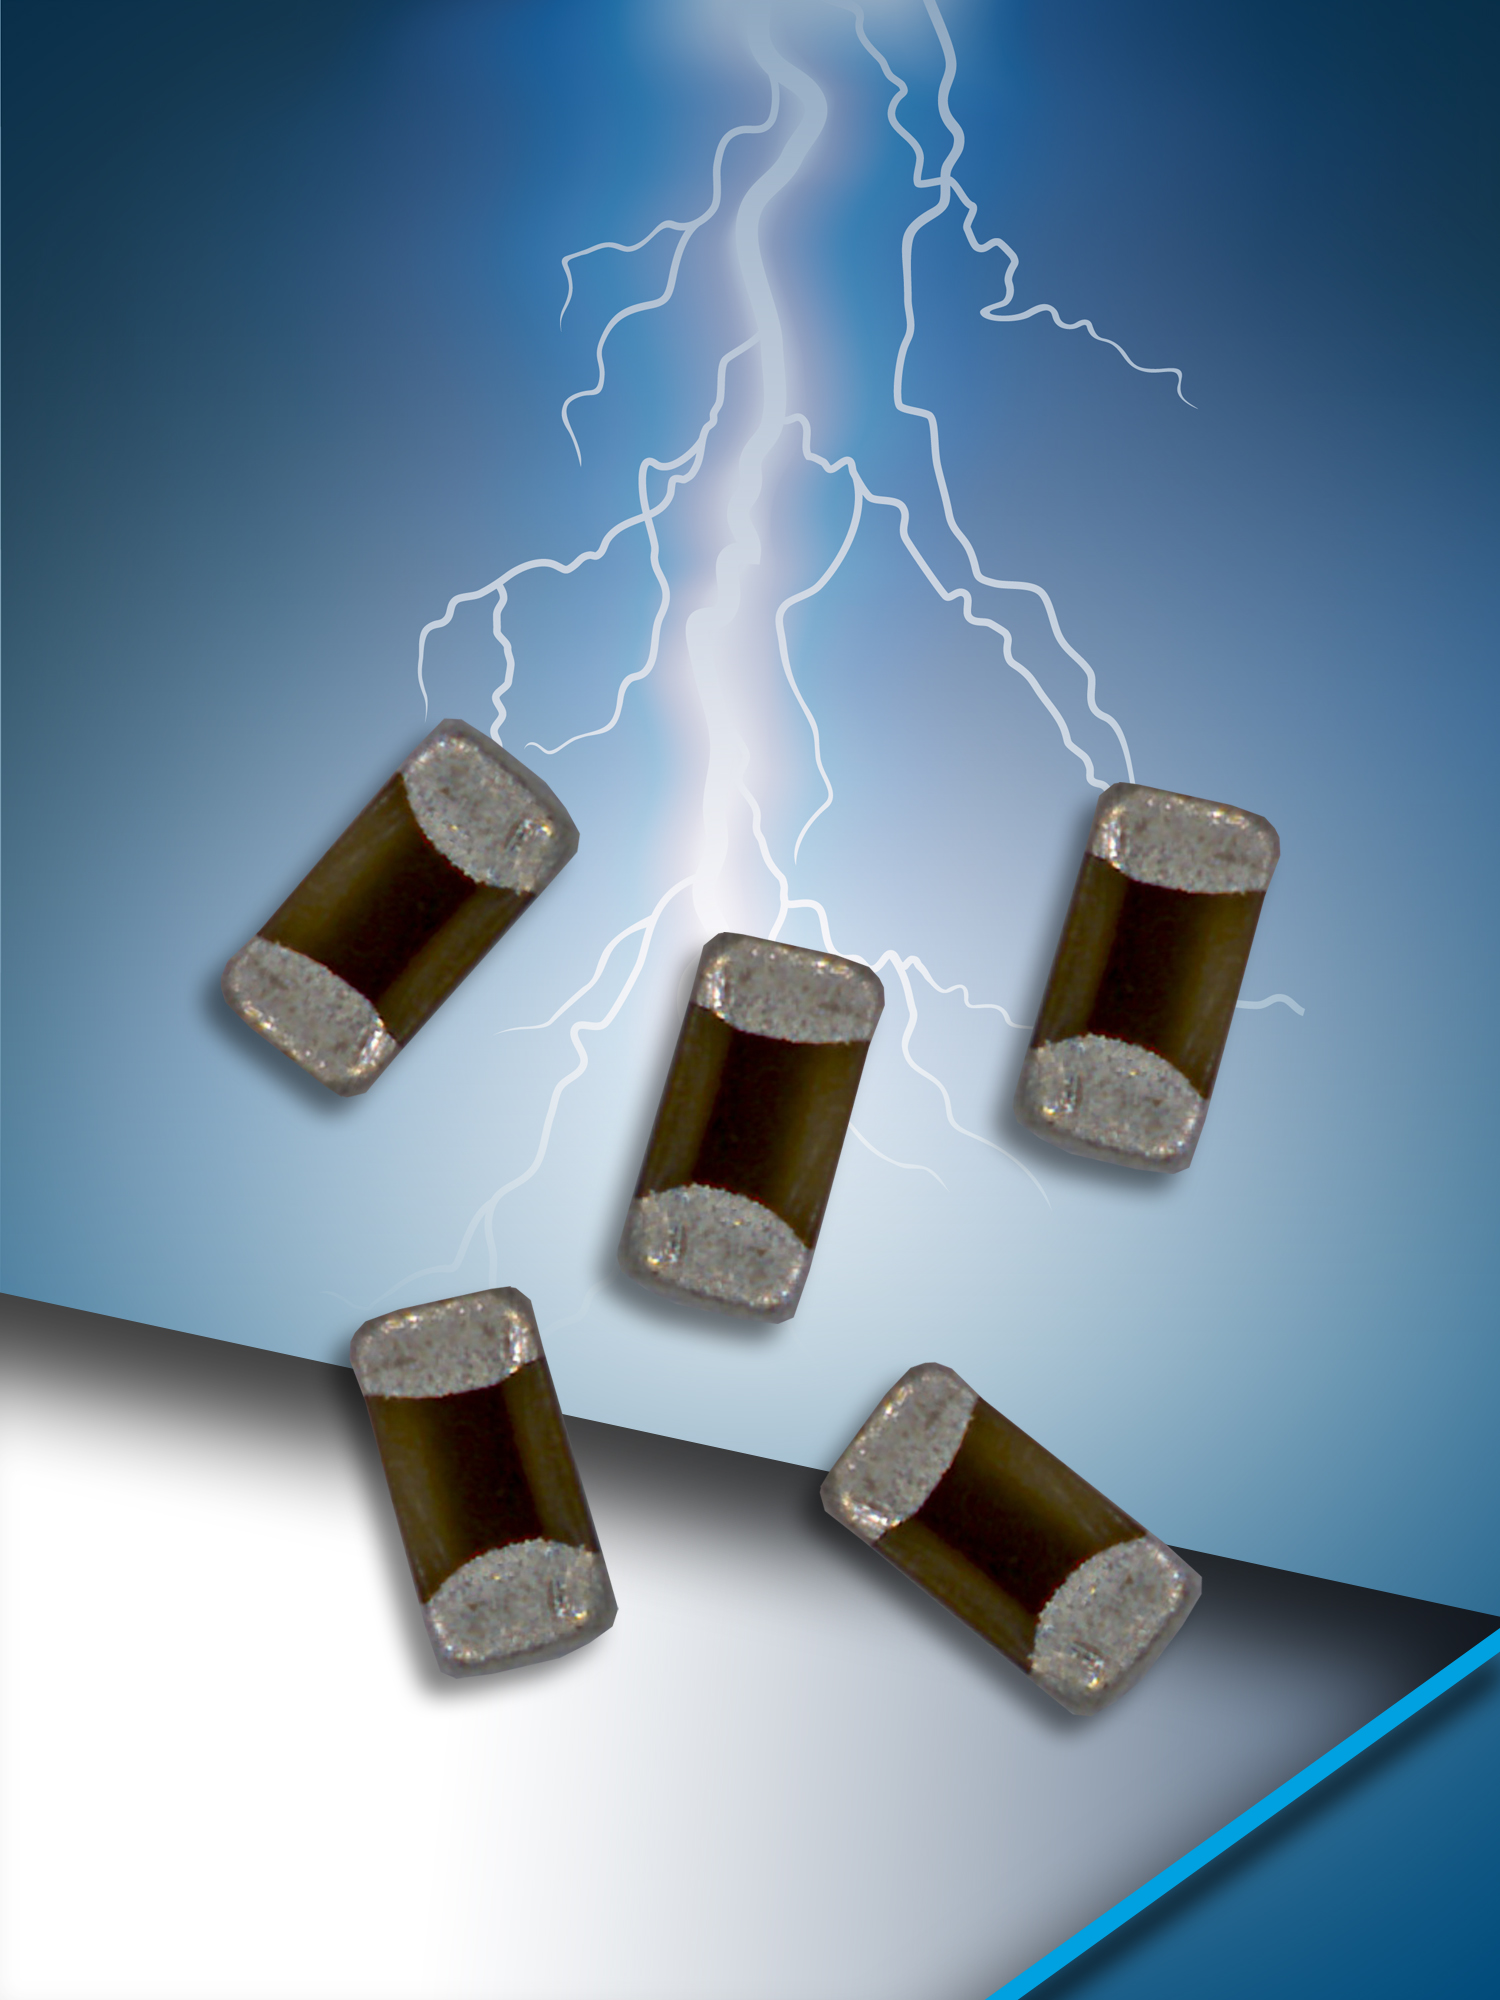 AVX Releases Leadless Bidirectional ESD Suppression Diodes for High-Speed Circuit Protection